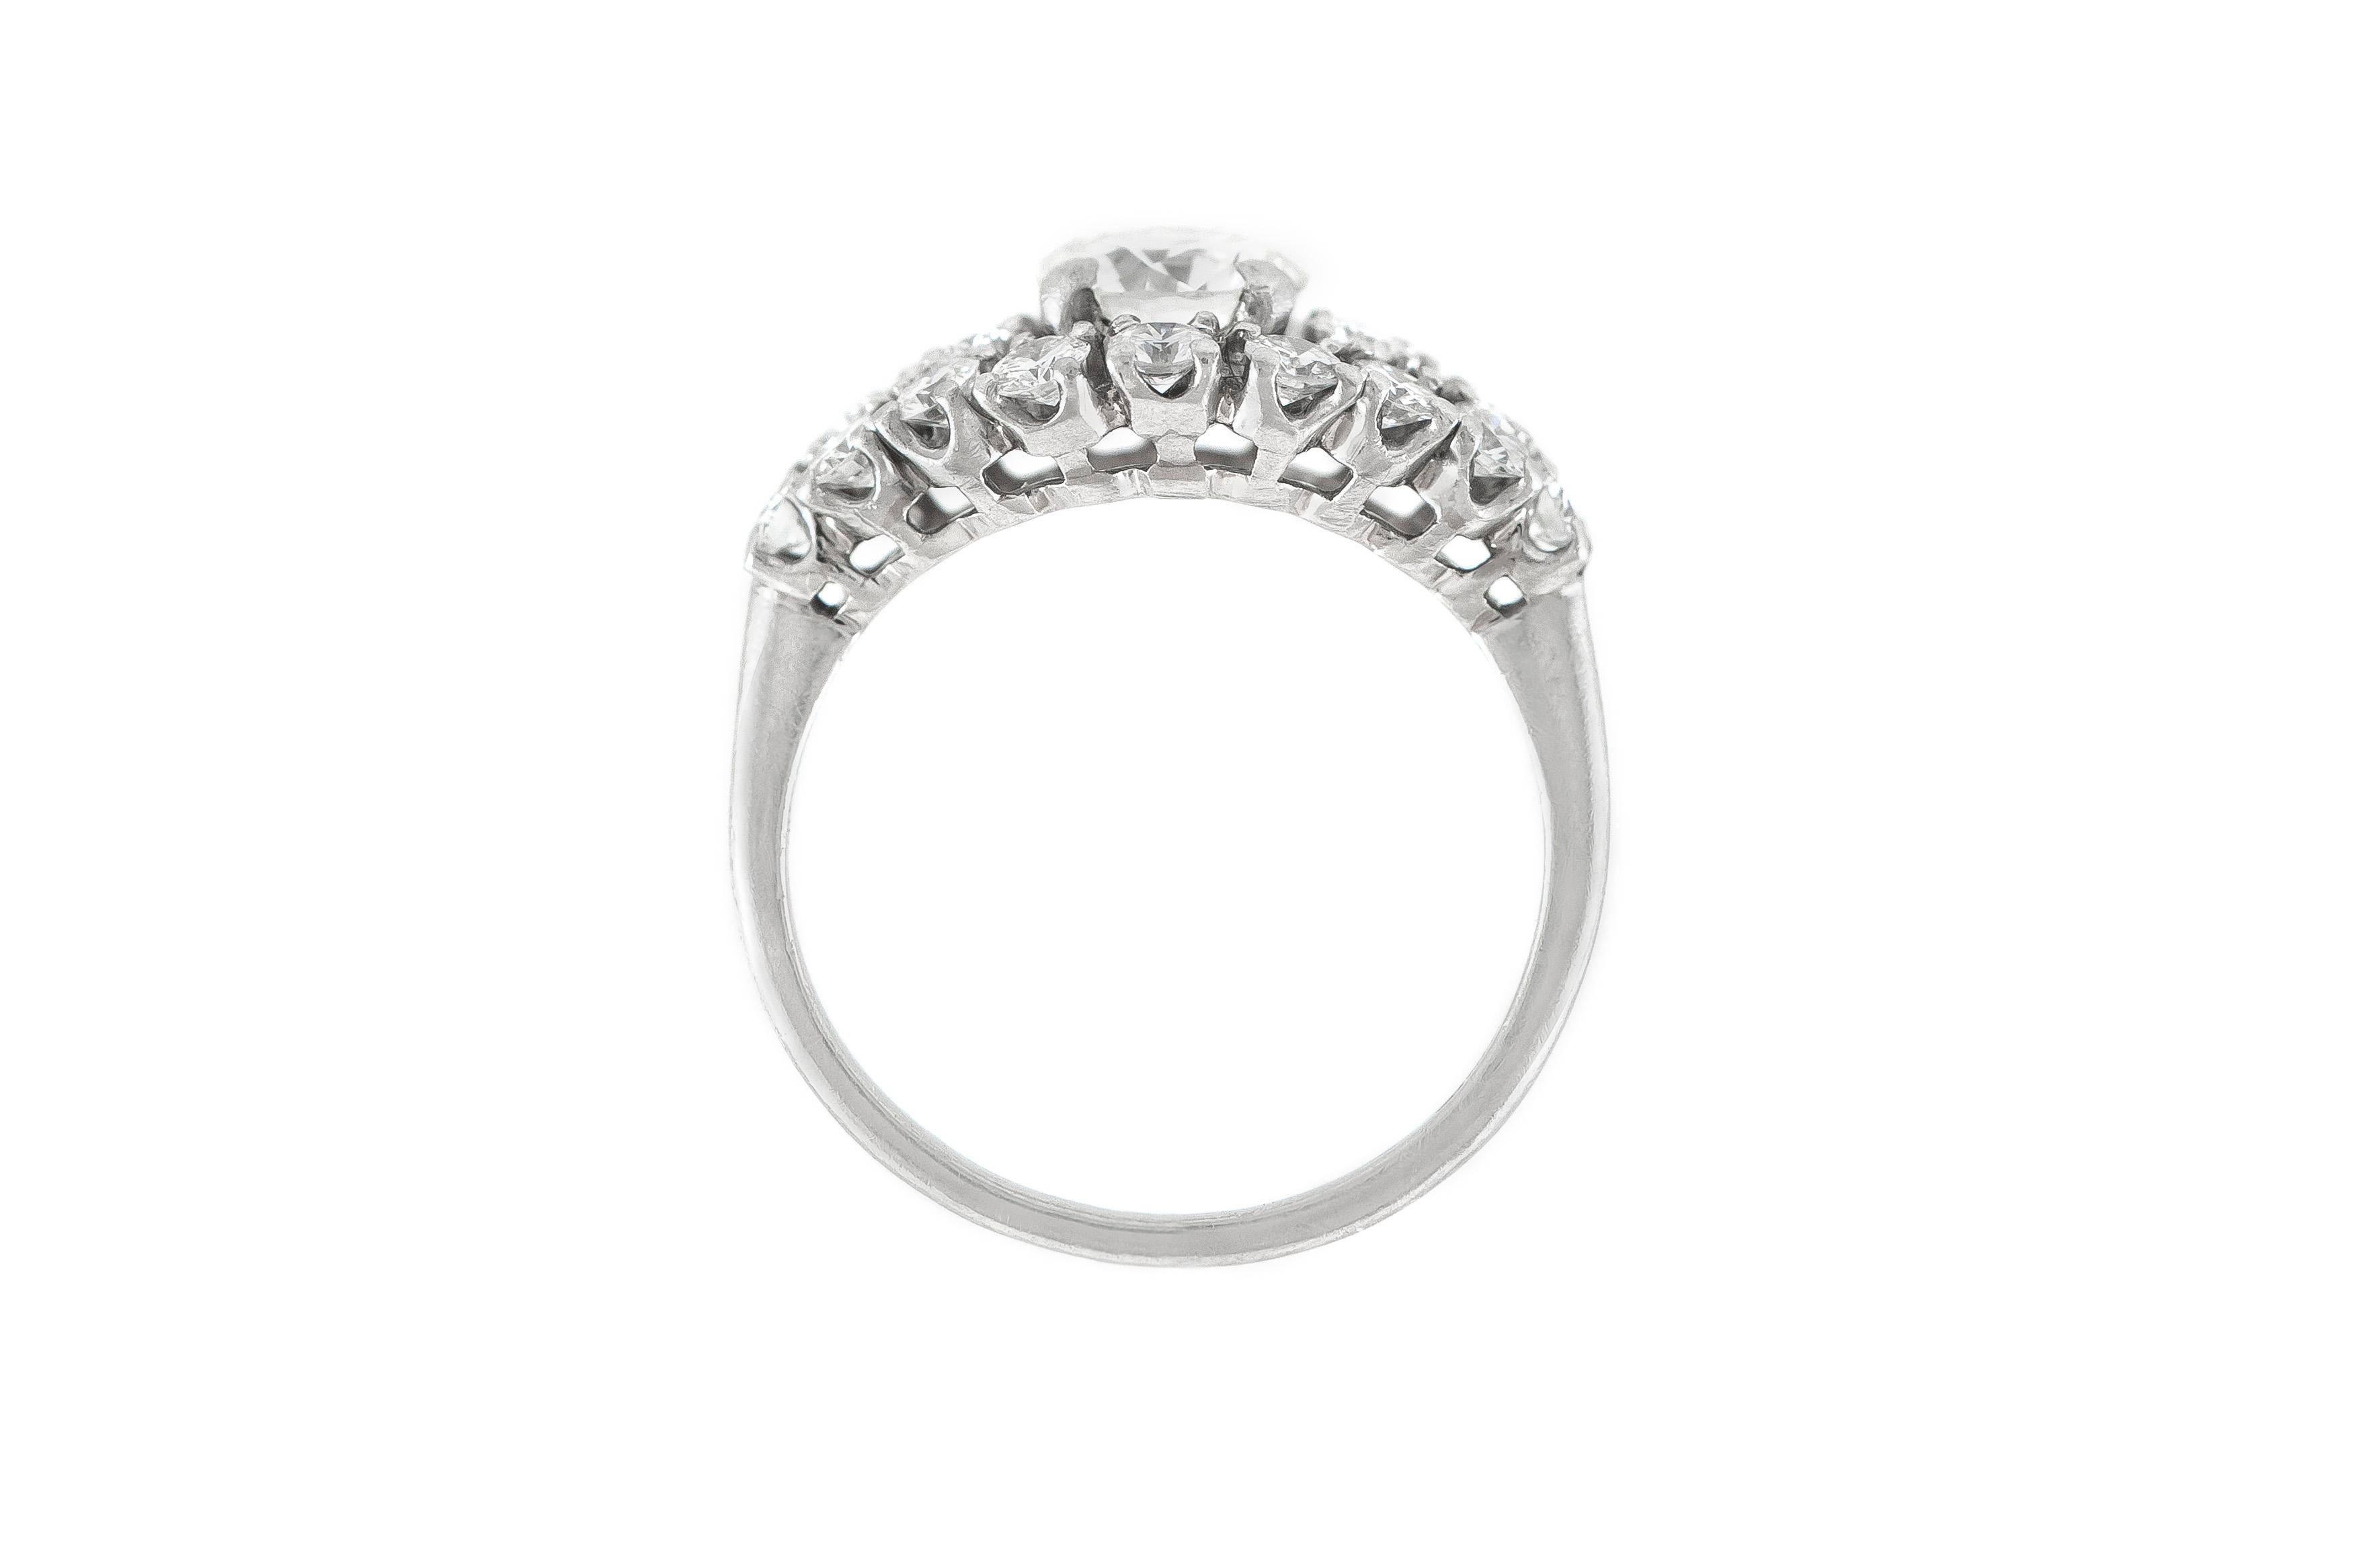 The ring is finely crafted in platinum with center diamond weighing approximately total of 1.00 carat. Color E-F , Clarity VS .
The round diamonds weighing approximately total of 0.90 carat.